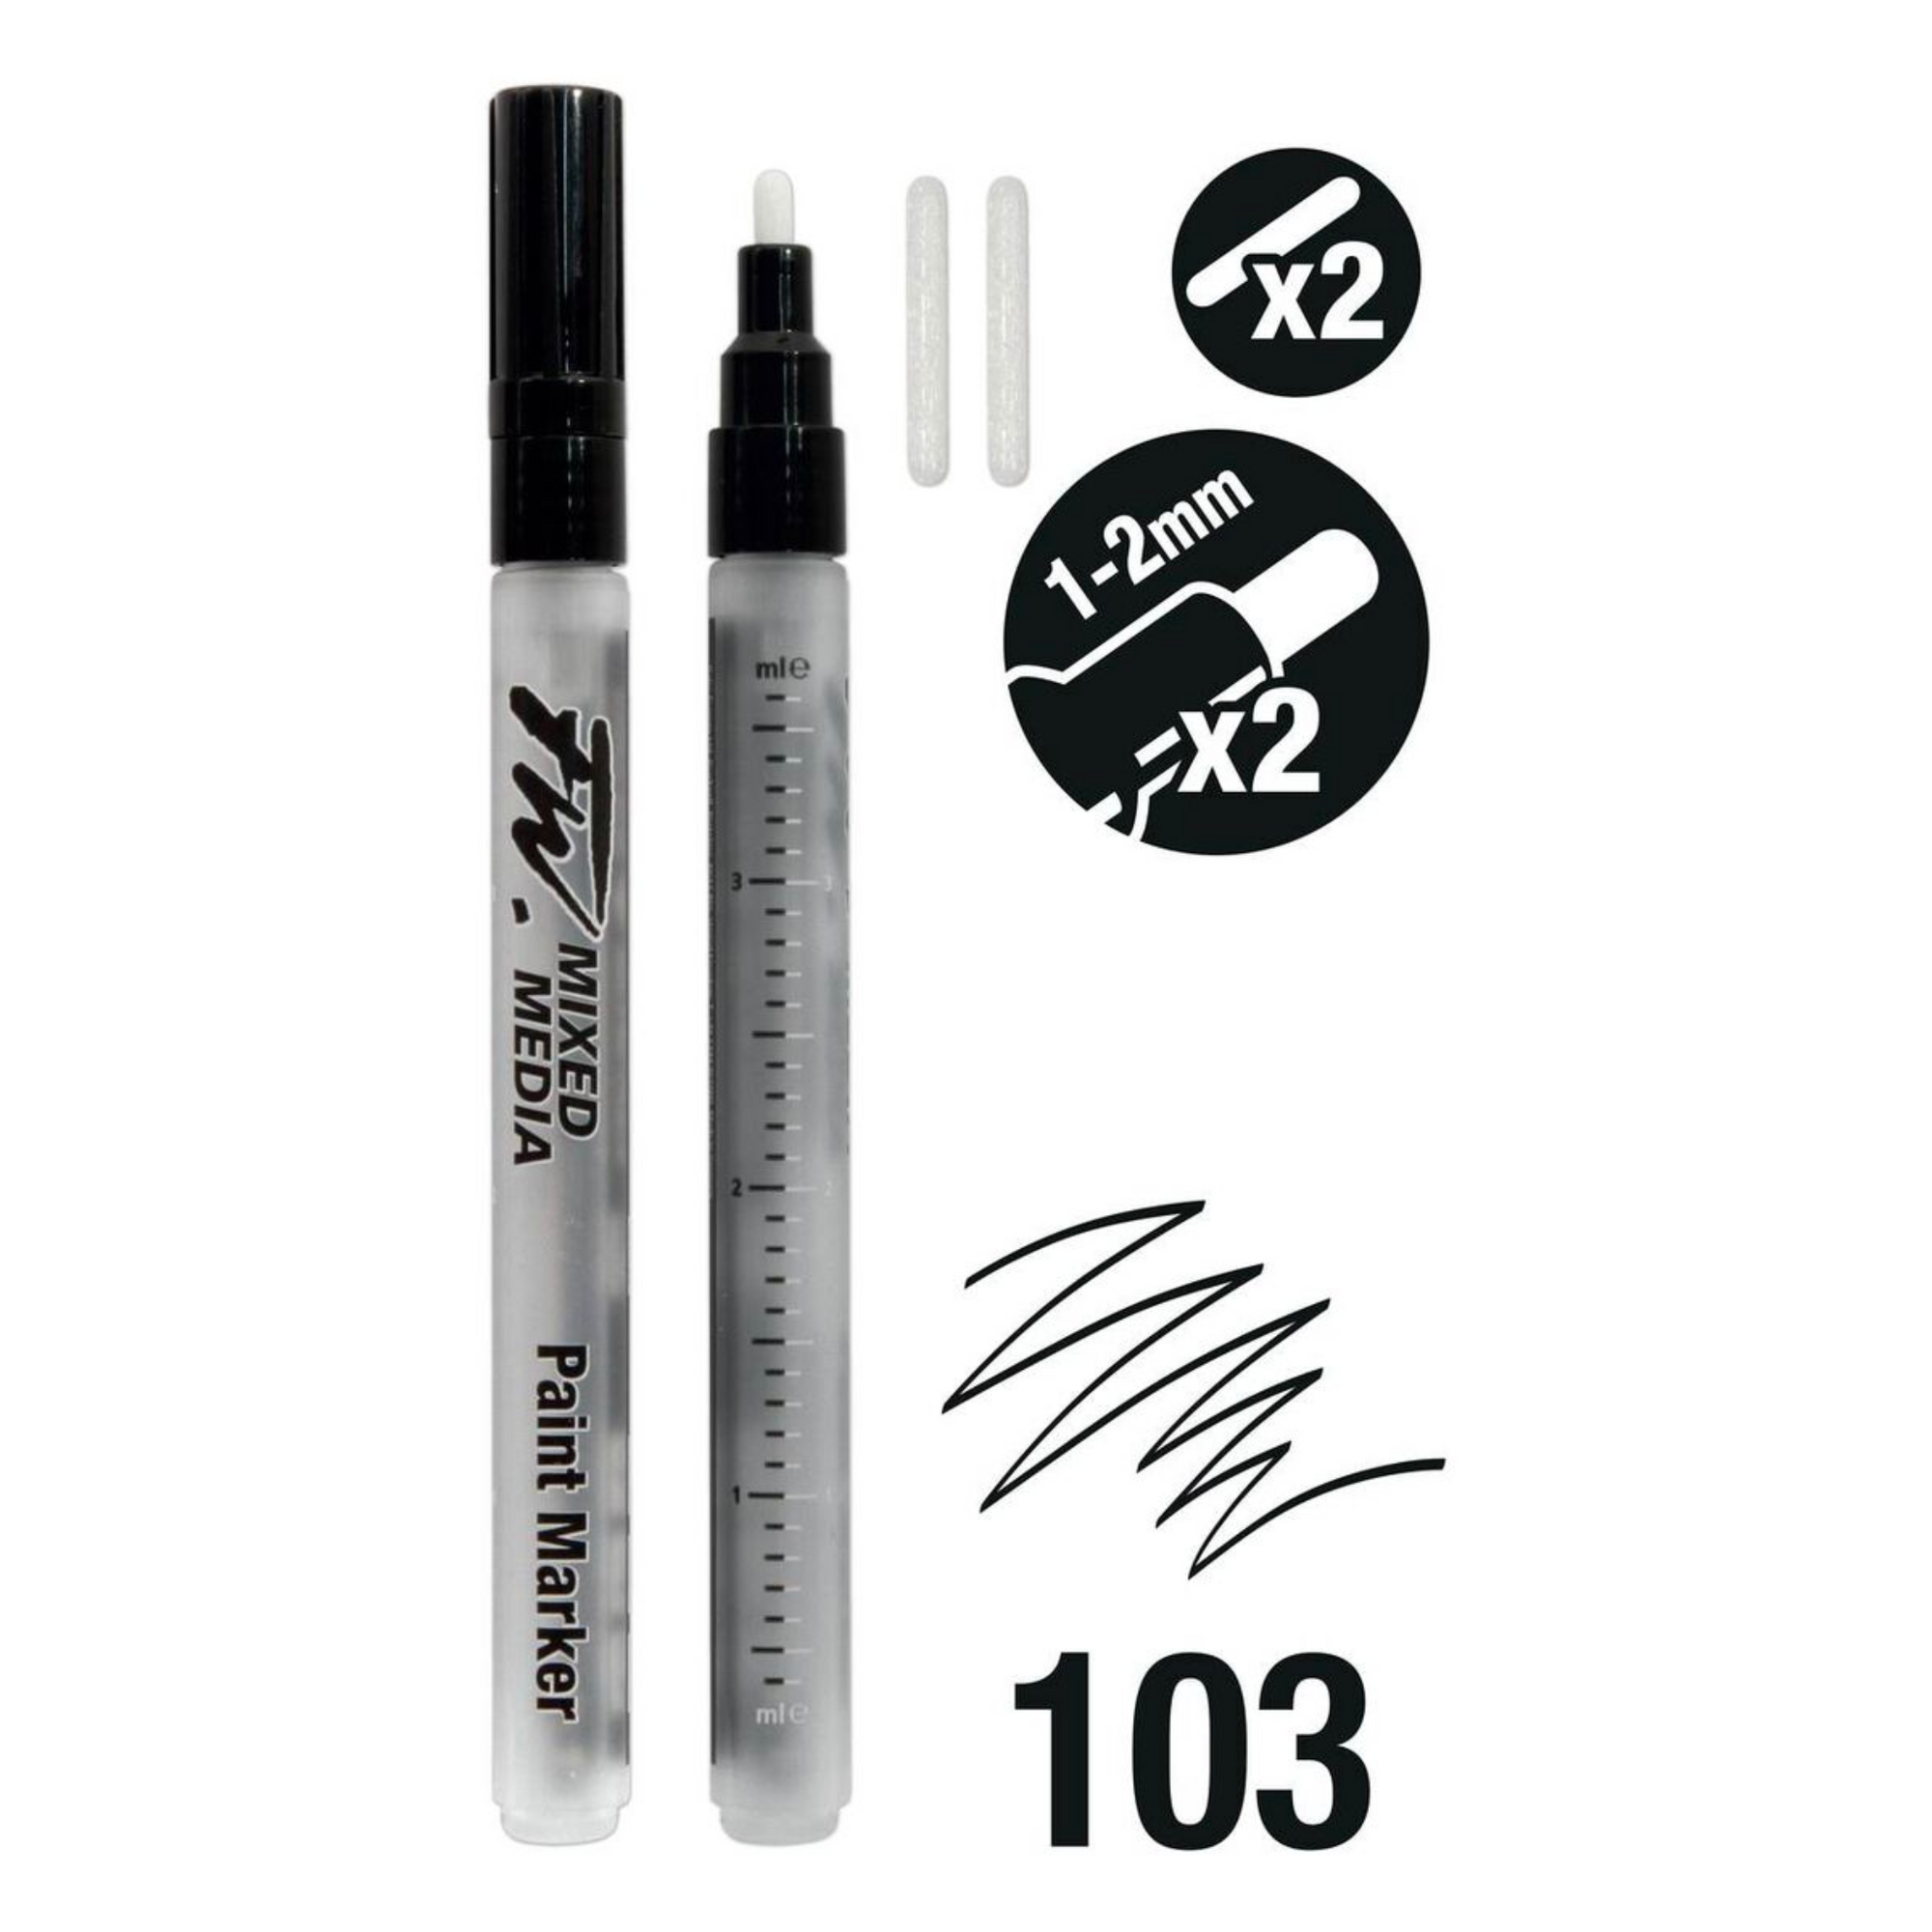 Daler-Rowney FW Small Round Mixed Media Markers and Nibs 1-2mm 2 Pack